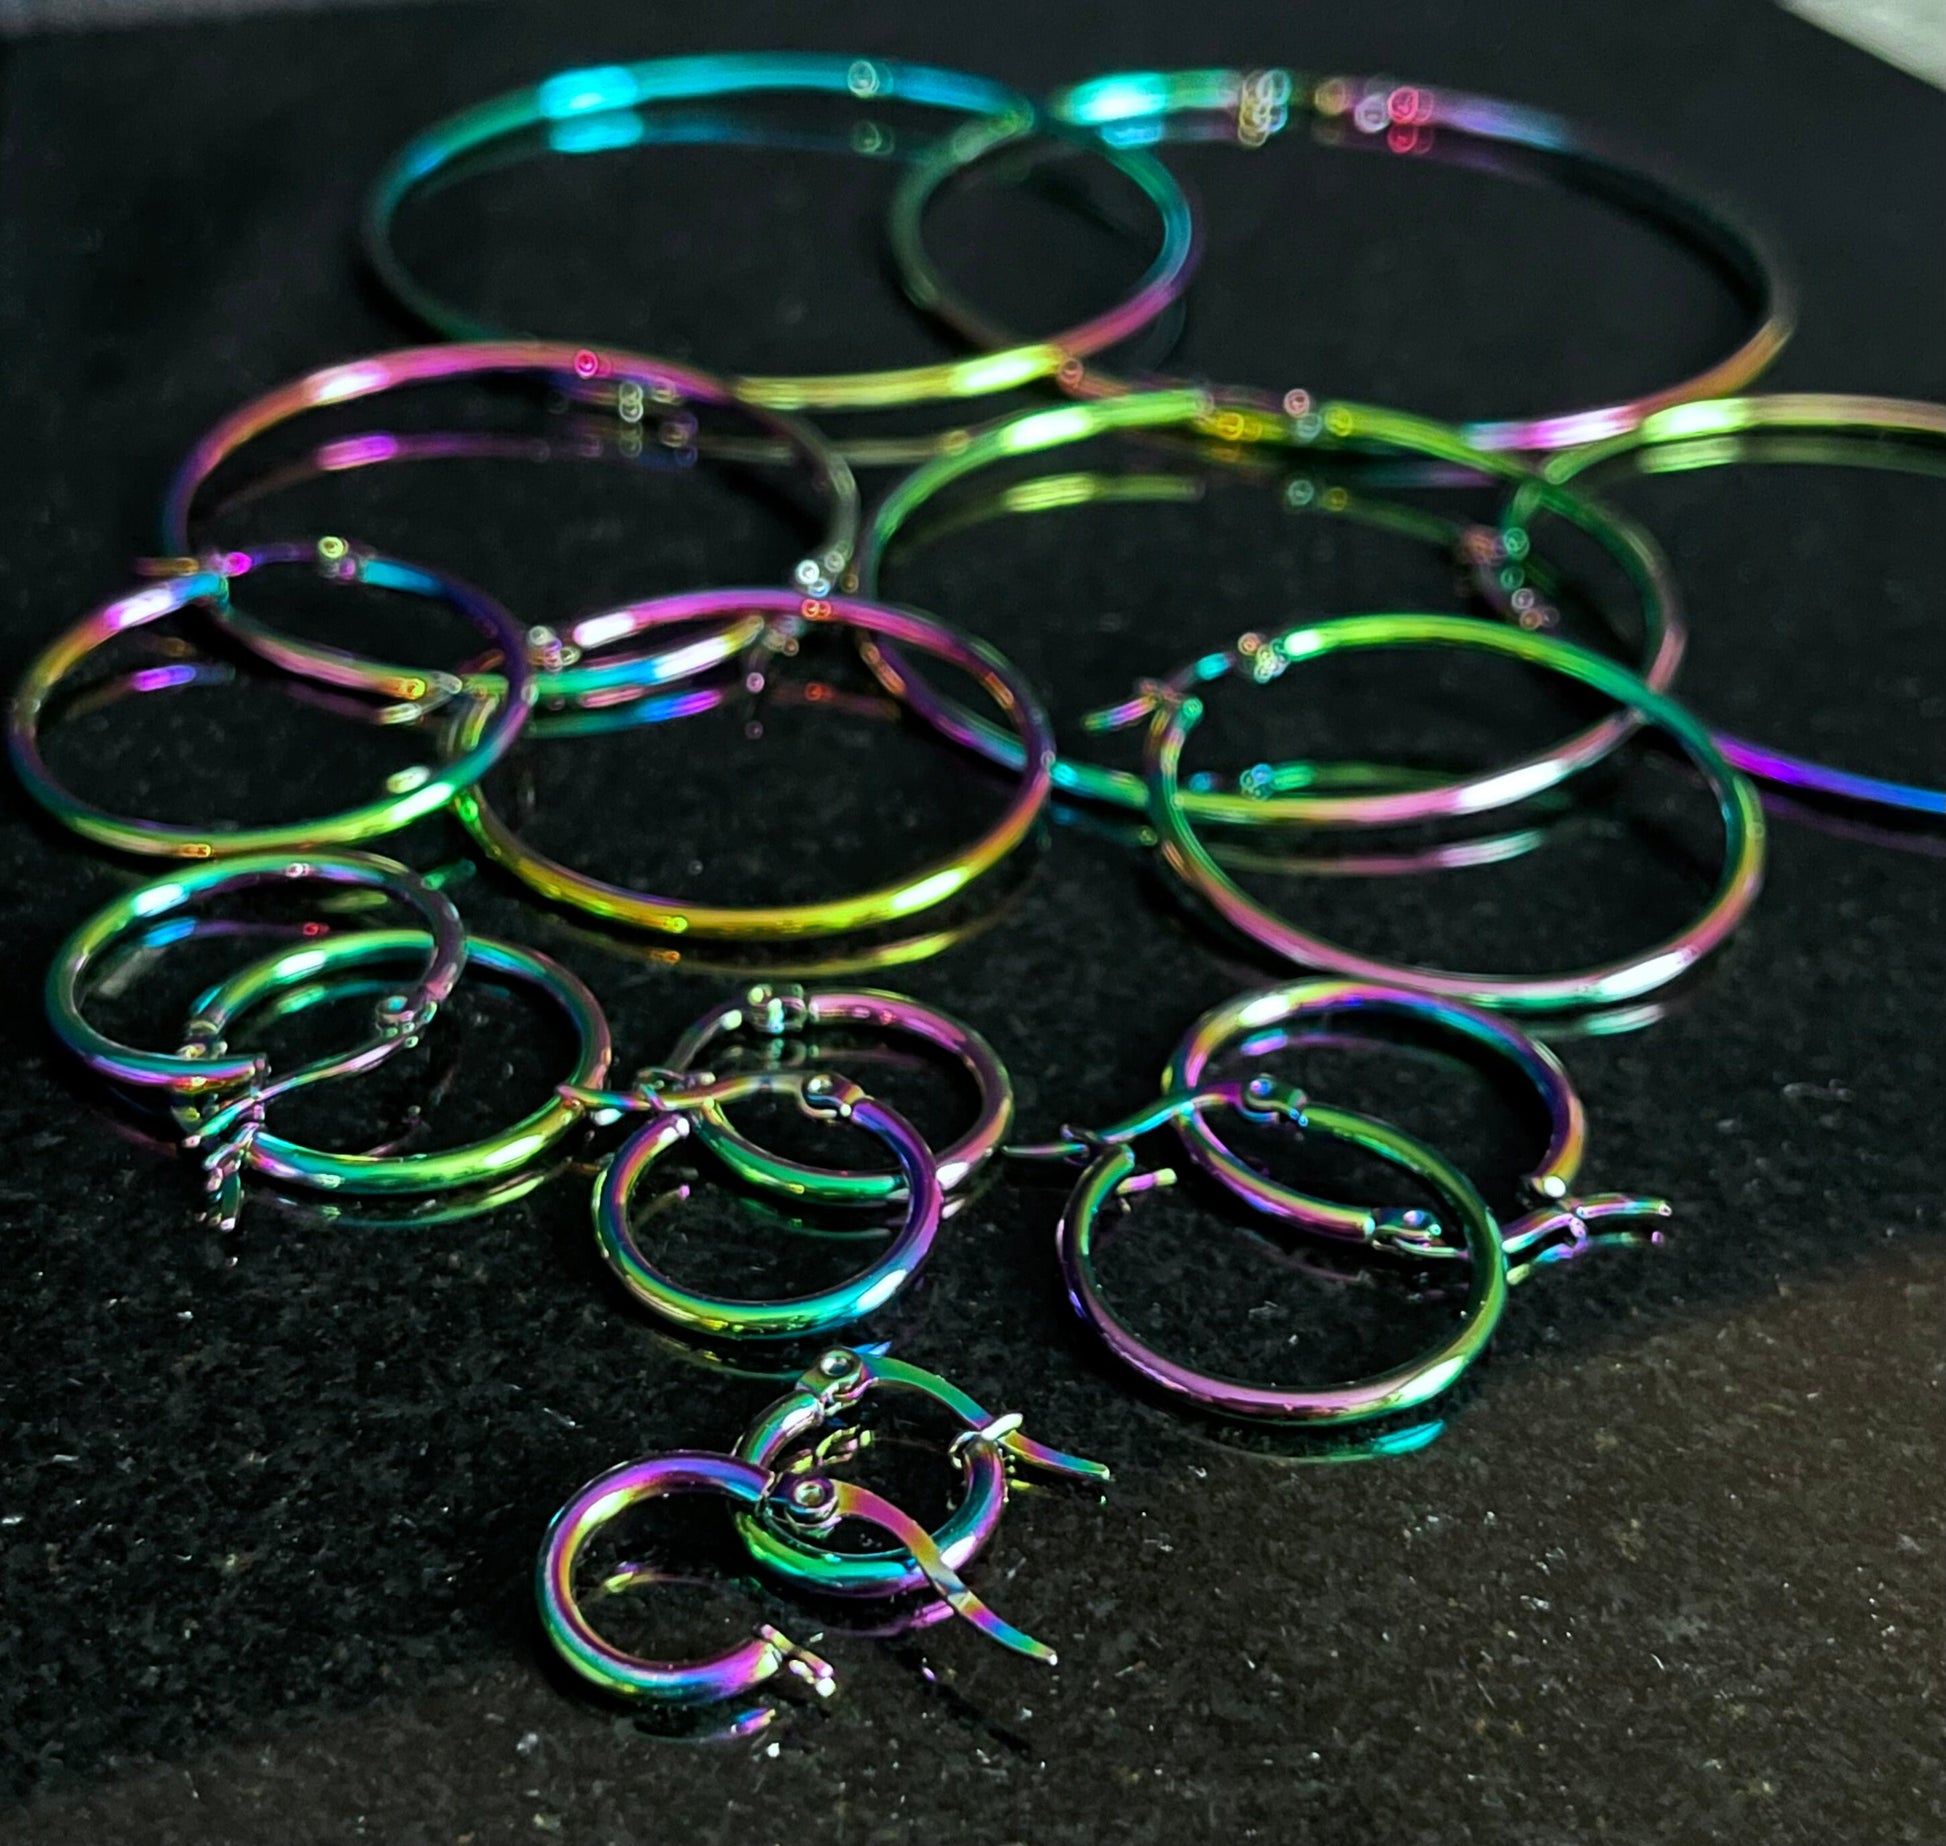 Pair of Stunningly Unique Rainbow Hoop Earrings - Ion Plated Stainless Steel Ring - 22g - 10mm thru 75mm Diameter Available!